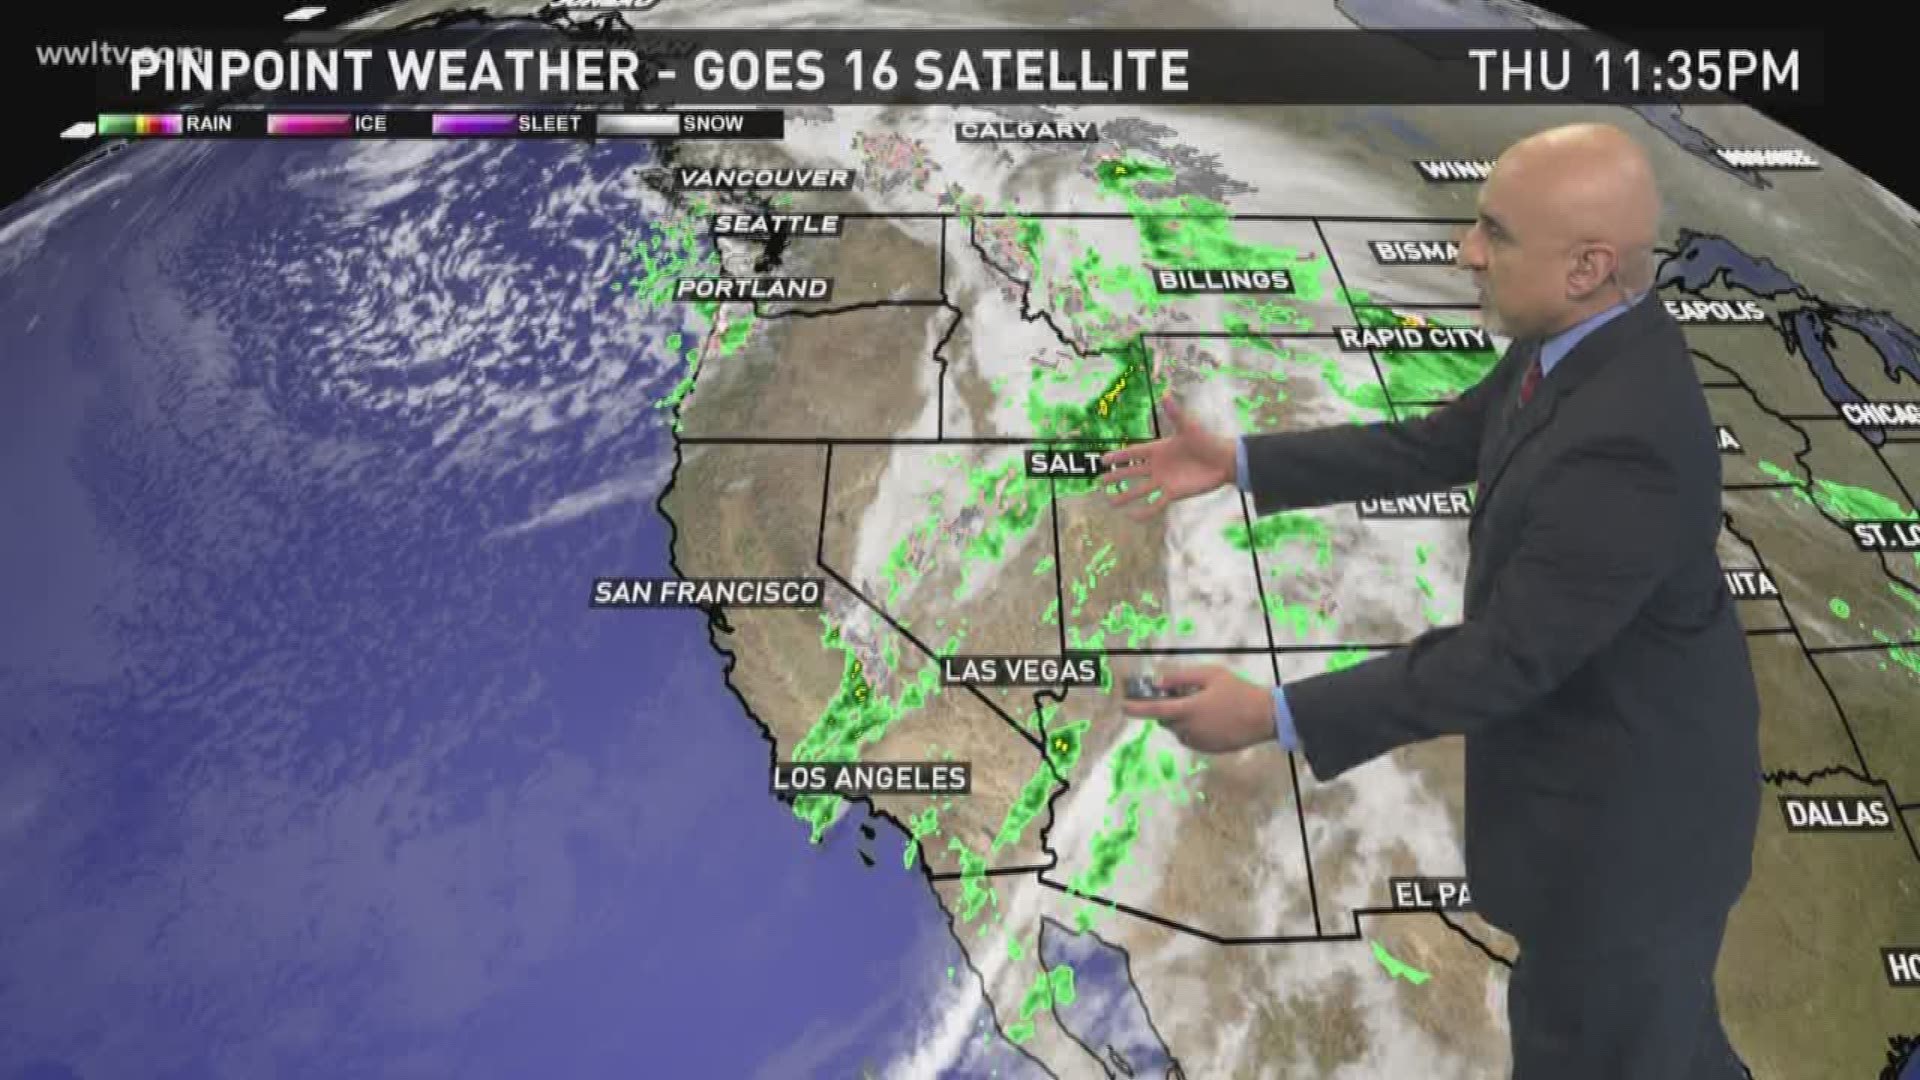 Chief Meteorologist Carl Arredondo and the Thursday night weather